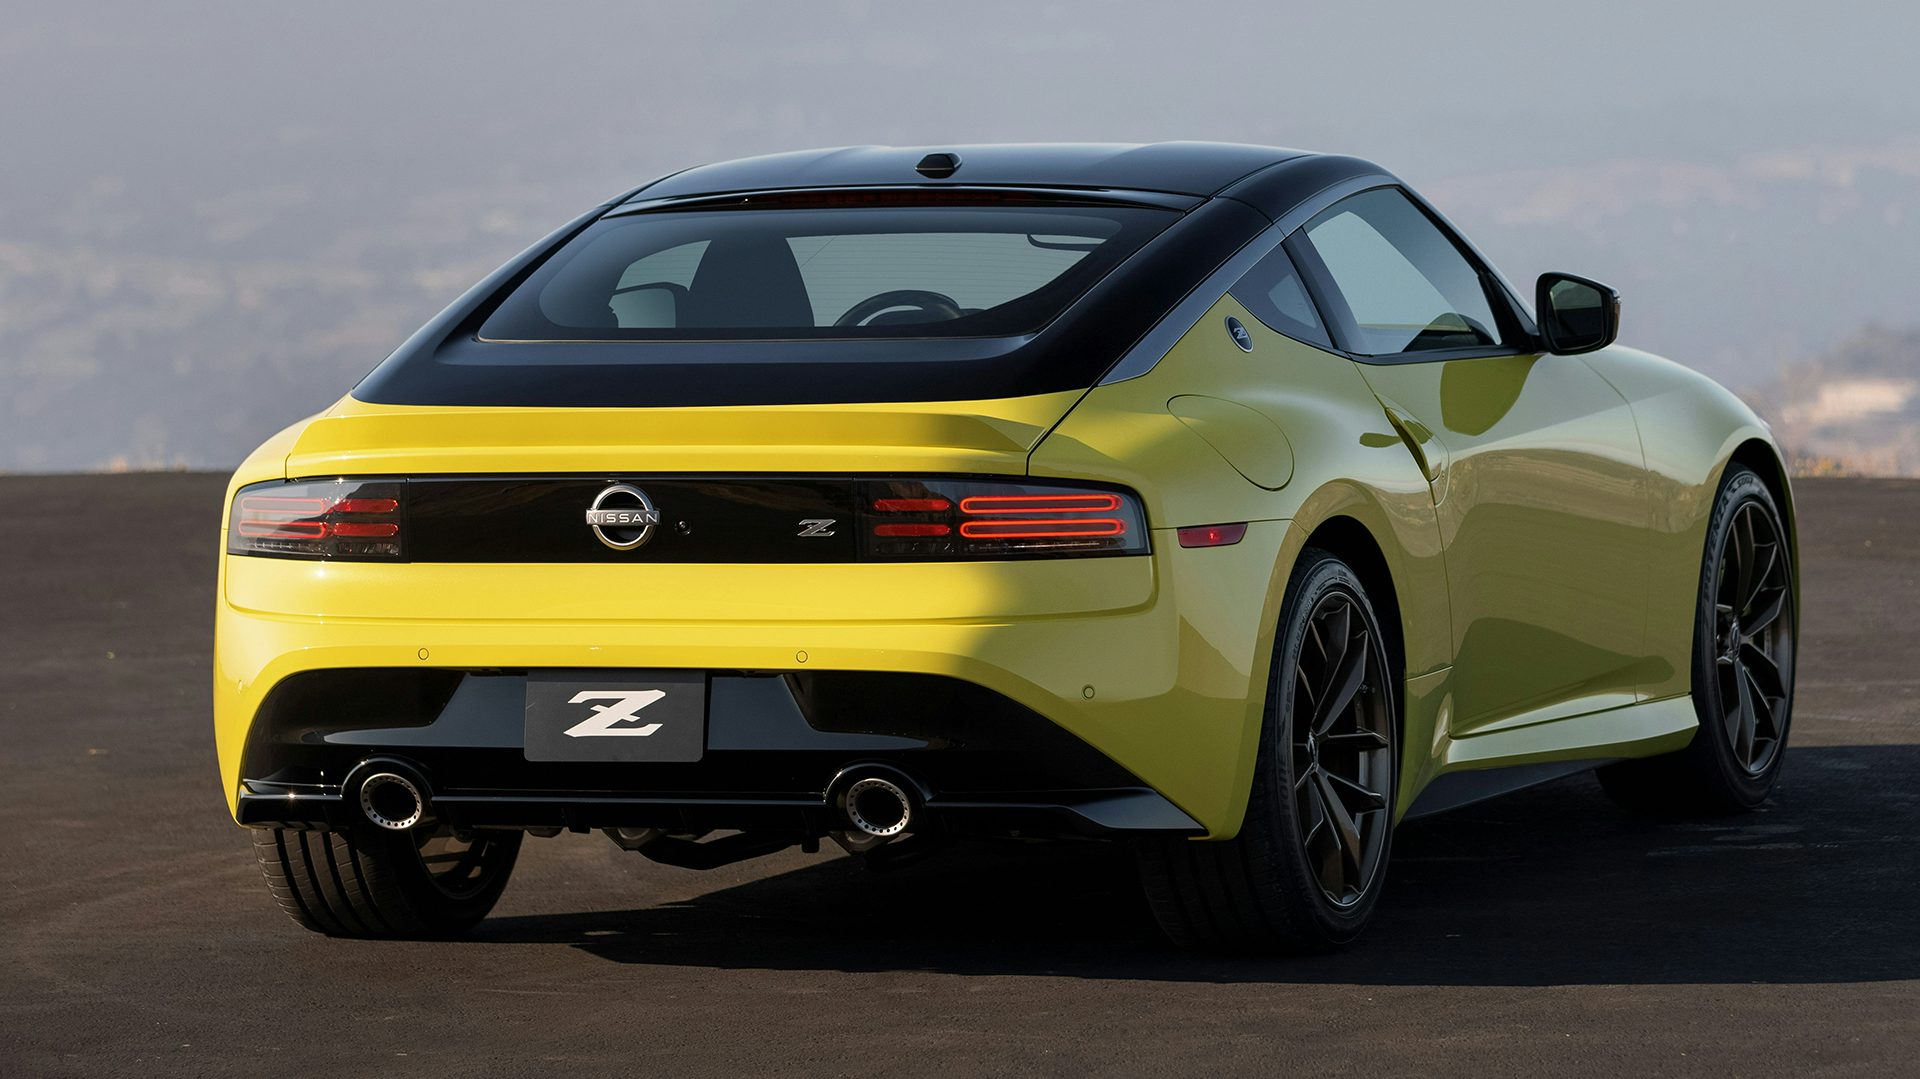 New Nissan Z revealed V6 manual sports car not destined for the UK